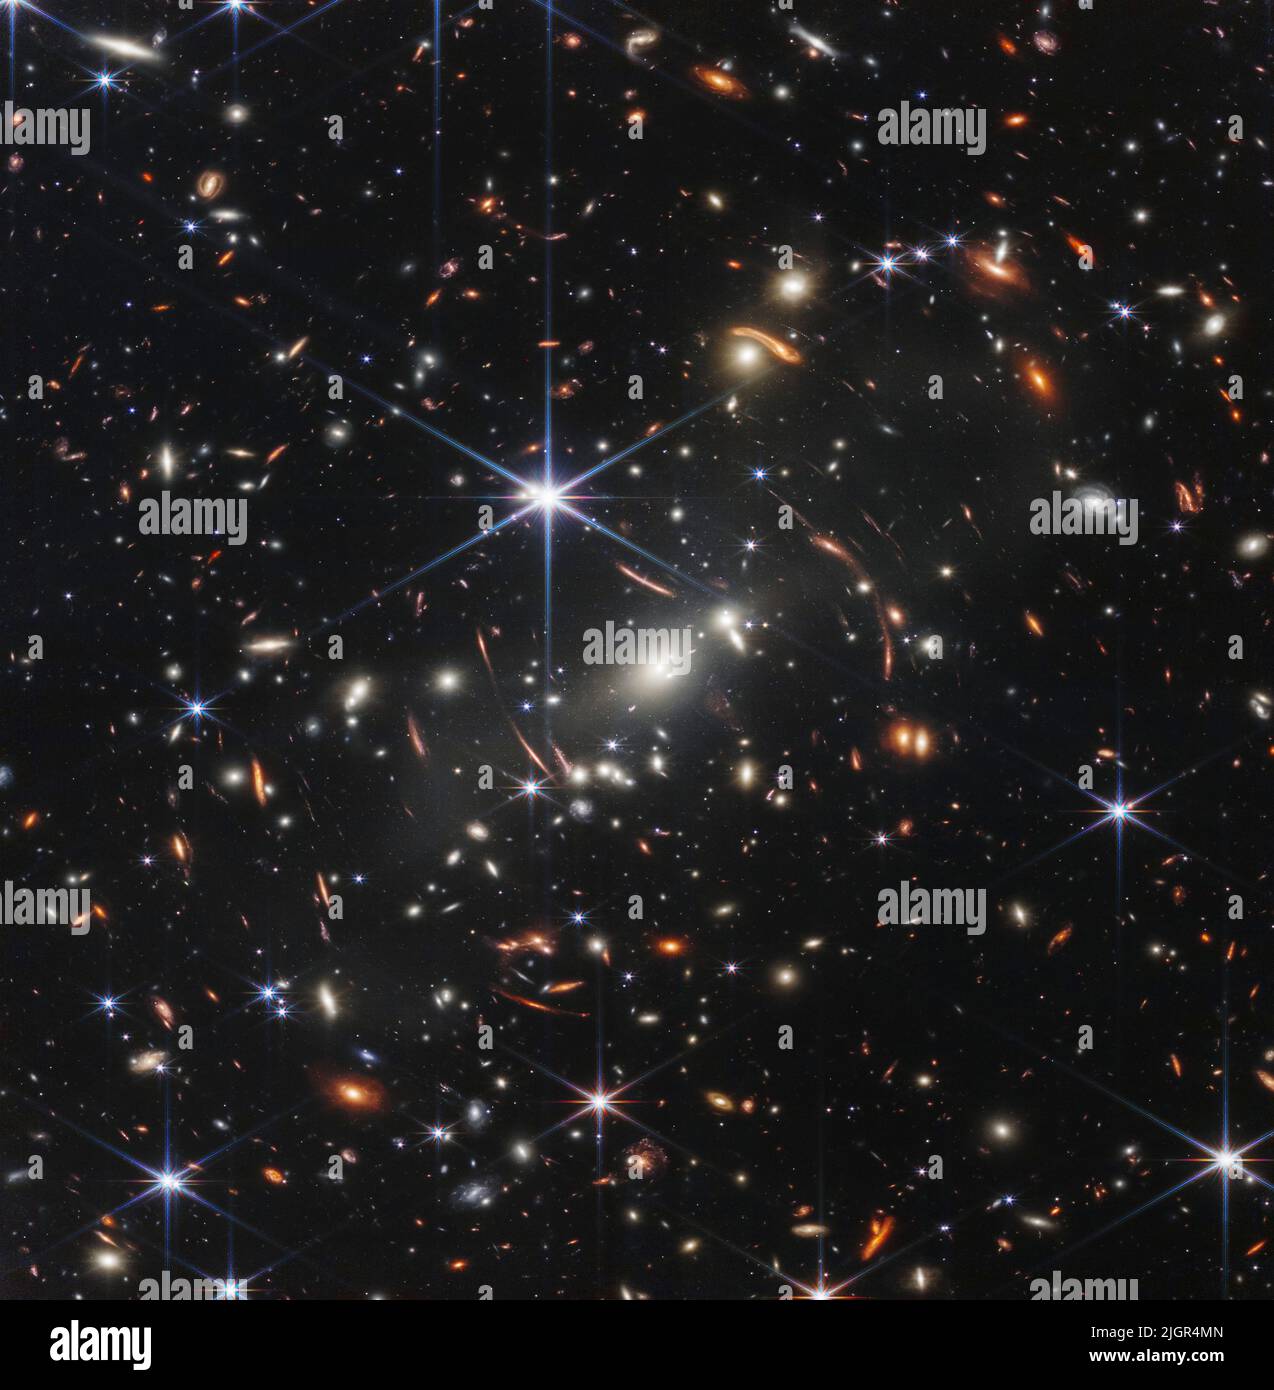 Greenbelt, United States Of America. 05th July, 2022. Greenbelt, United States of America. 05 July, 2022. The first group of photos captured by the NASA Webb Telescope shows a galaxy cluster SMACS 0723, known as Webb's First Deep Field, released from Goddard Space Flight Center July 12, 2022 in Greenbelt, Maryland. The cluster is teeming with thousands of galaxies - including the faintest objects ever observed in the infrared. Credit: NASA/JPL-Caltech/NASA, ESA, CSA, STScI/Alamy Live News Stock Photo